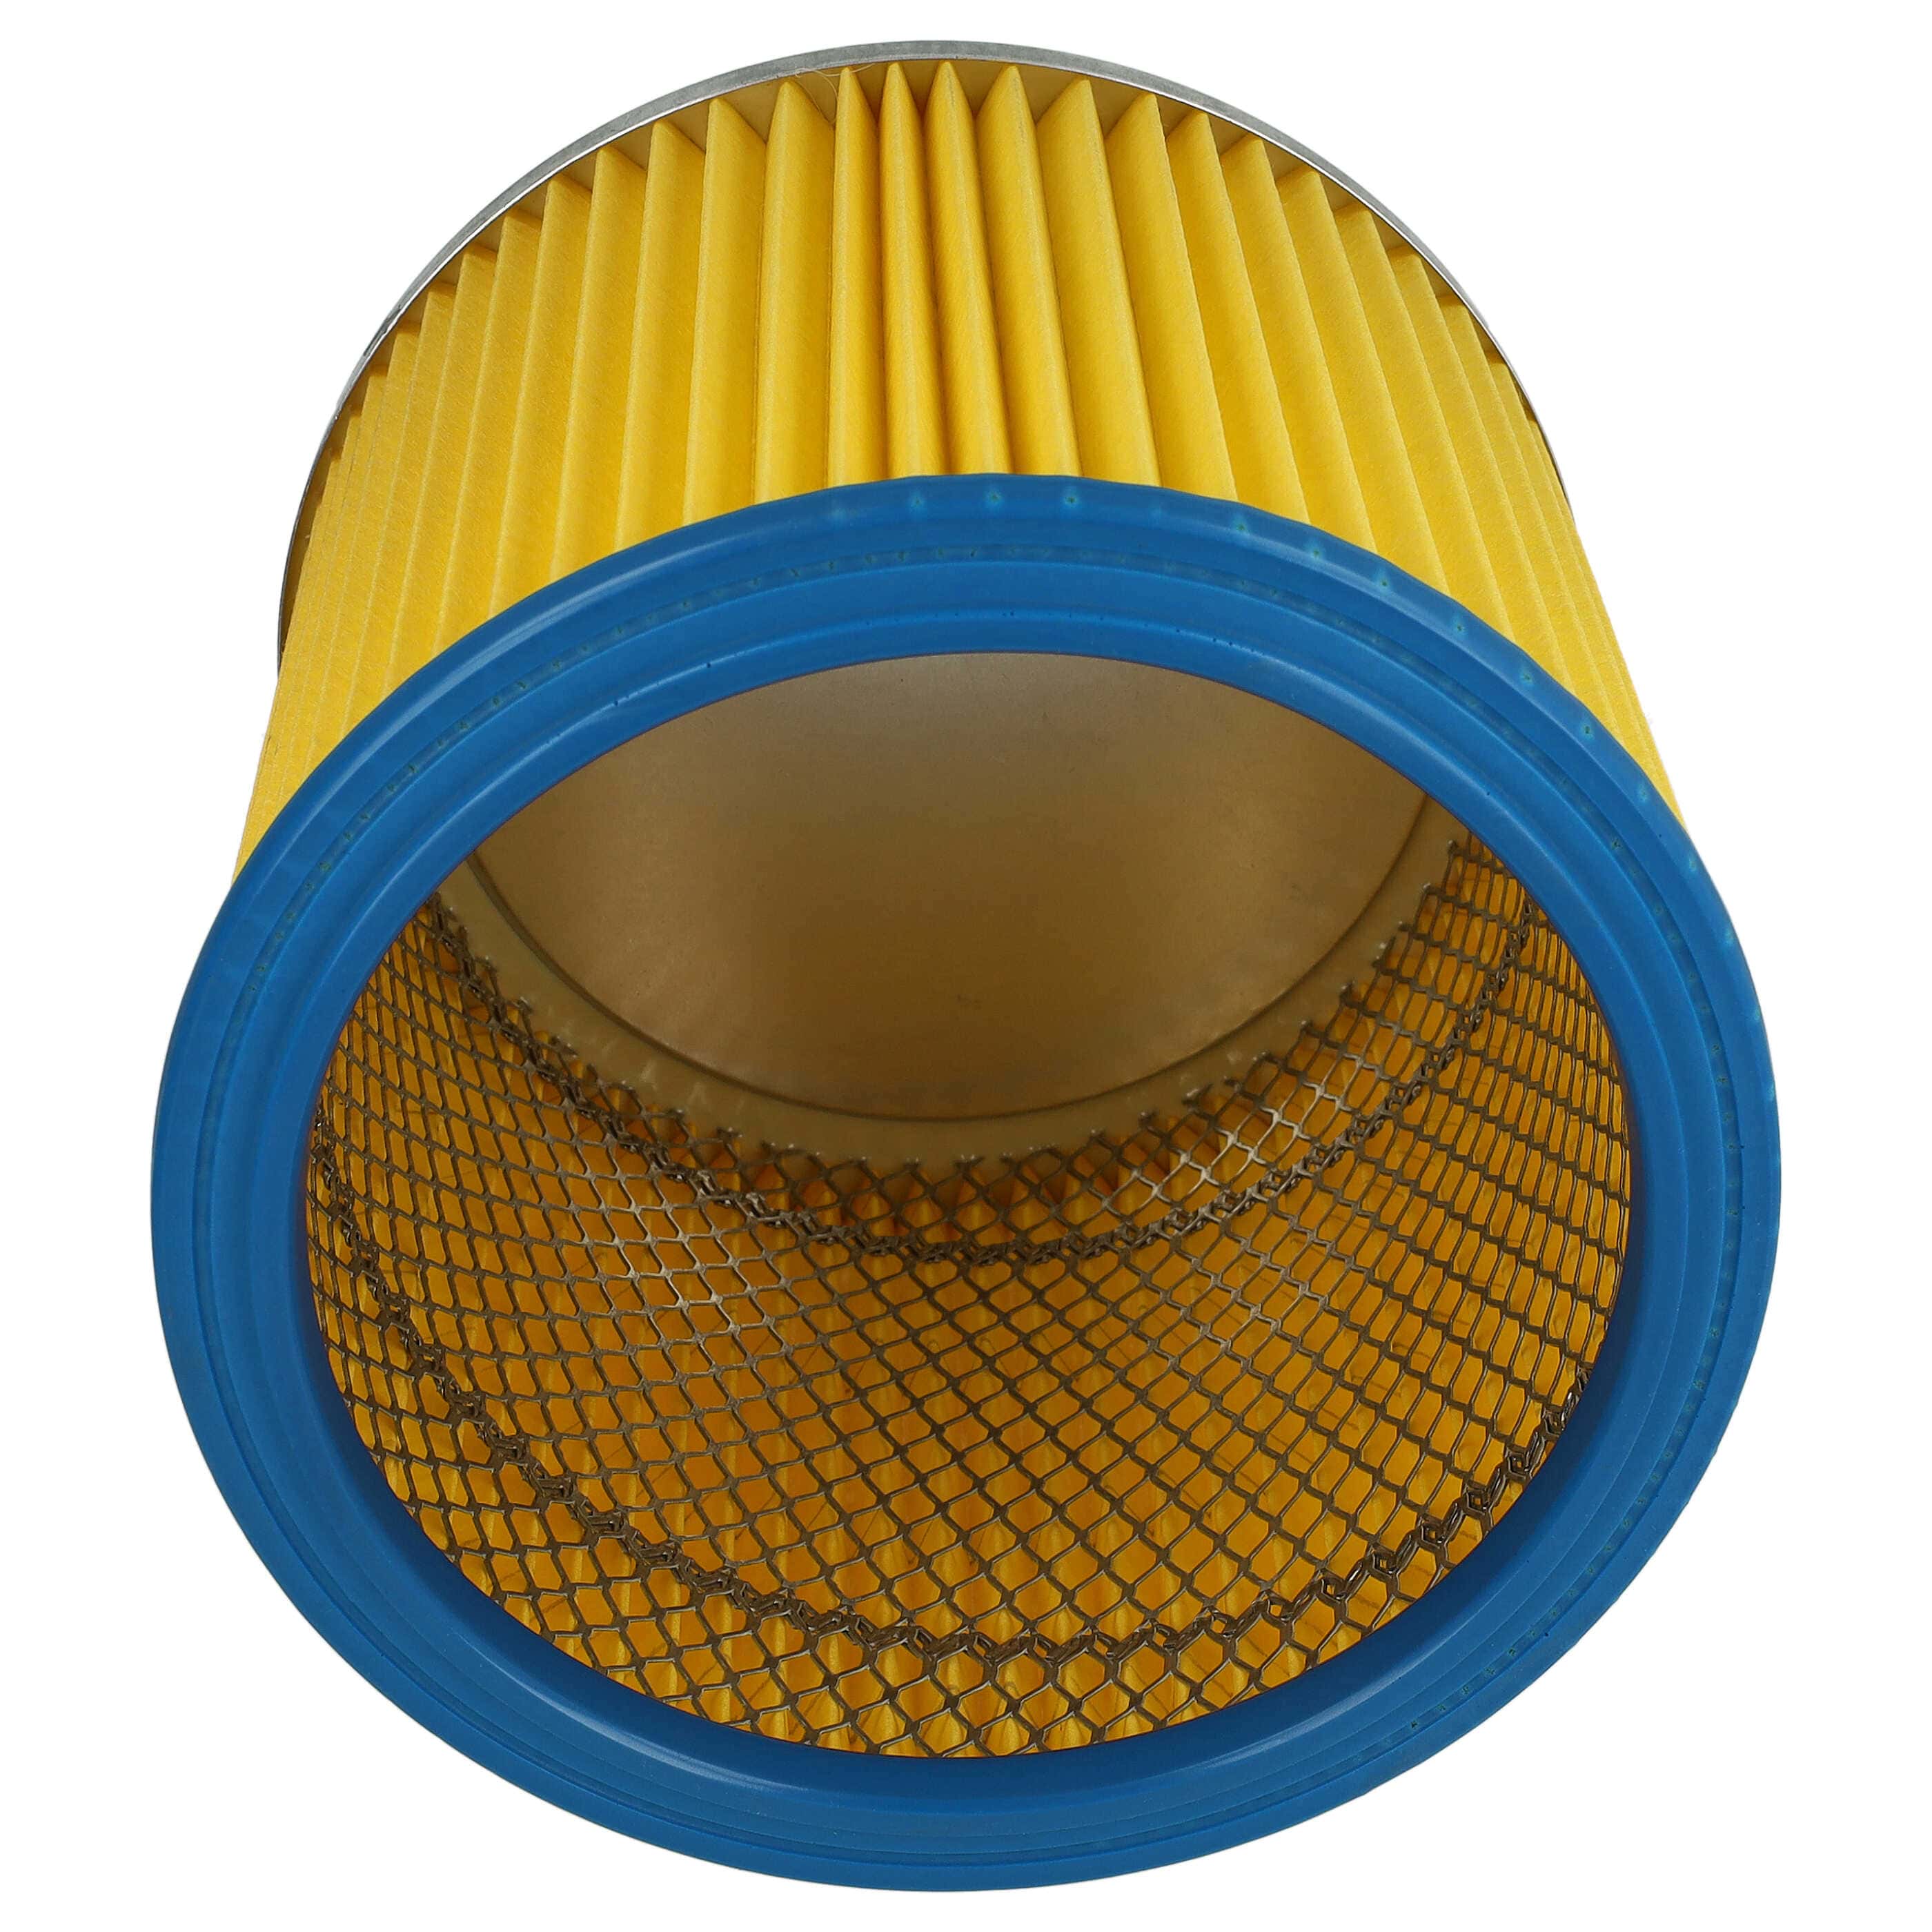 1x cartridge filter replaces Einhell 2351110 for ThomasVacuum Cleaner, blue / yellow